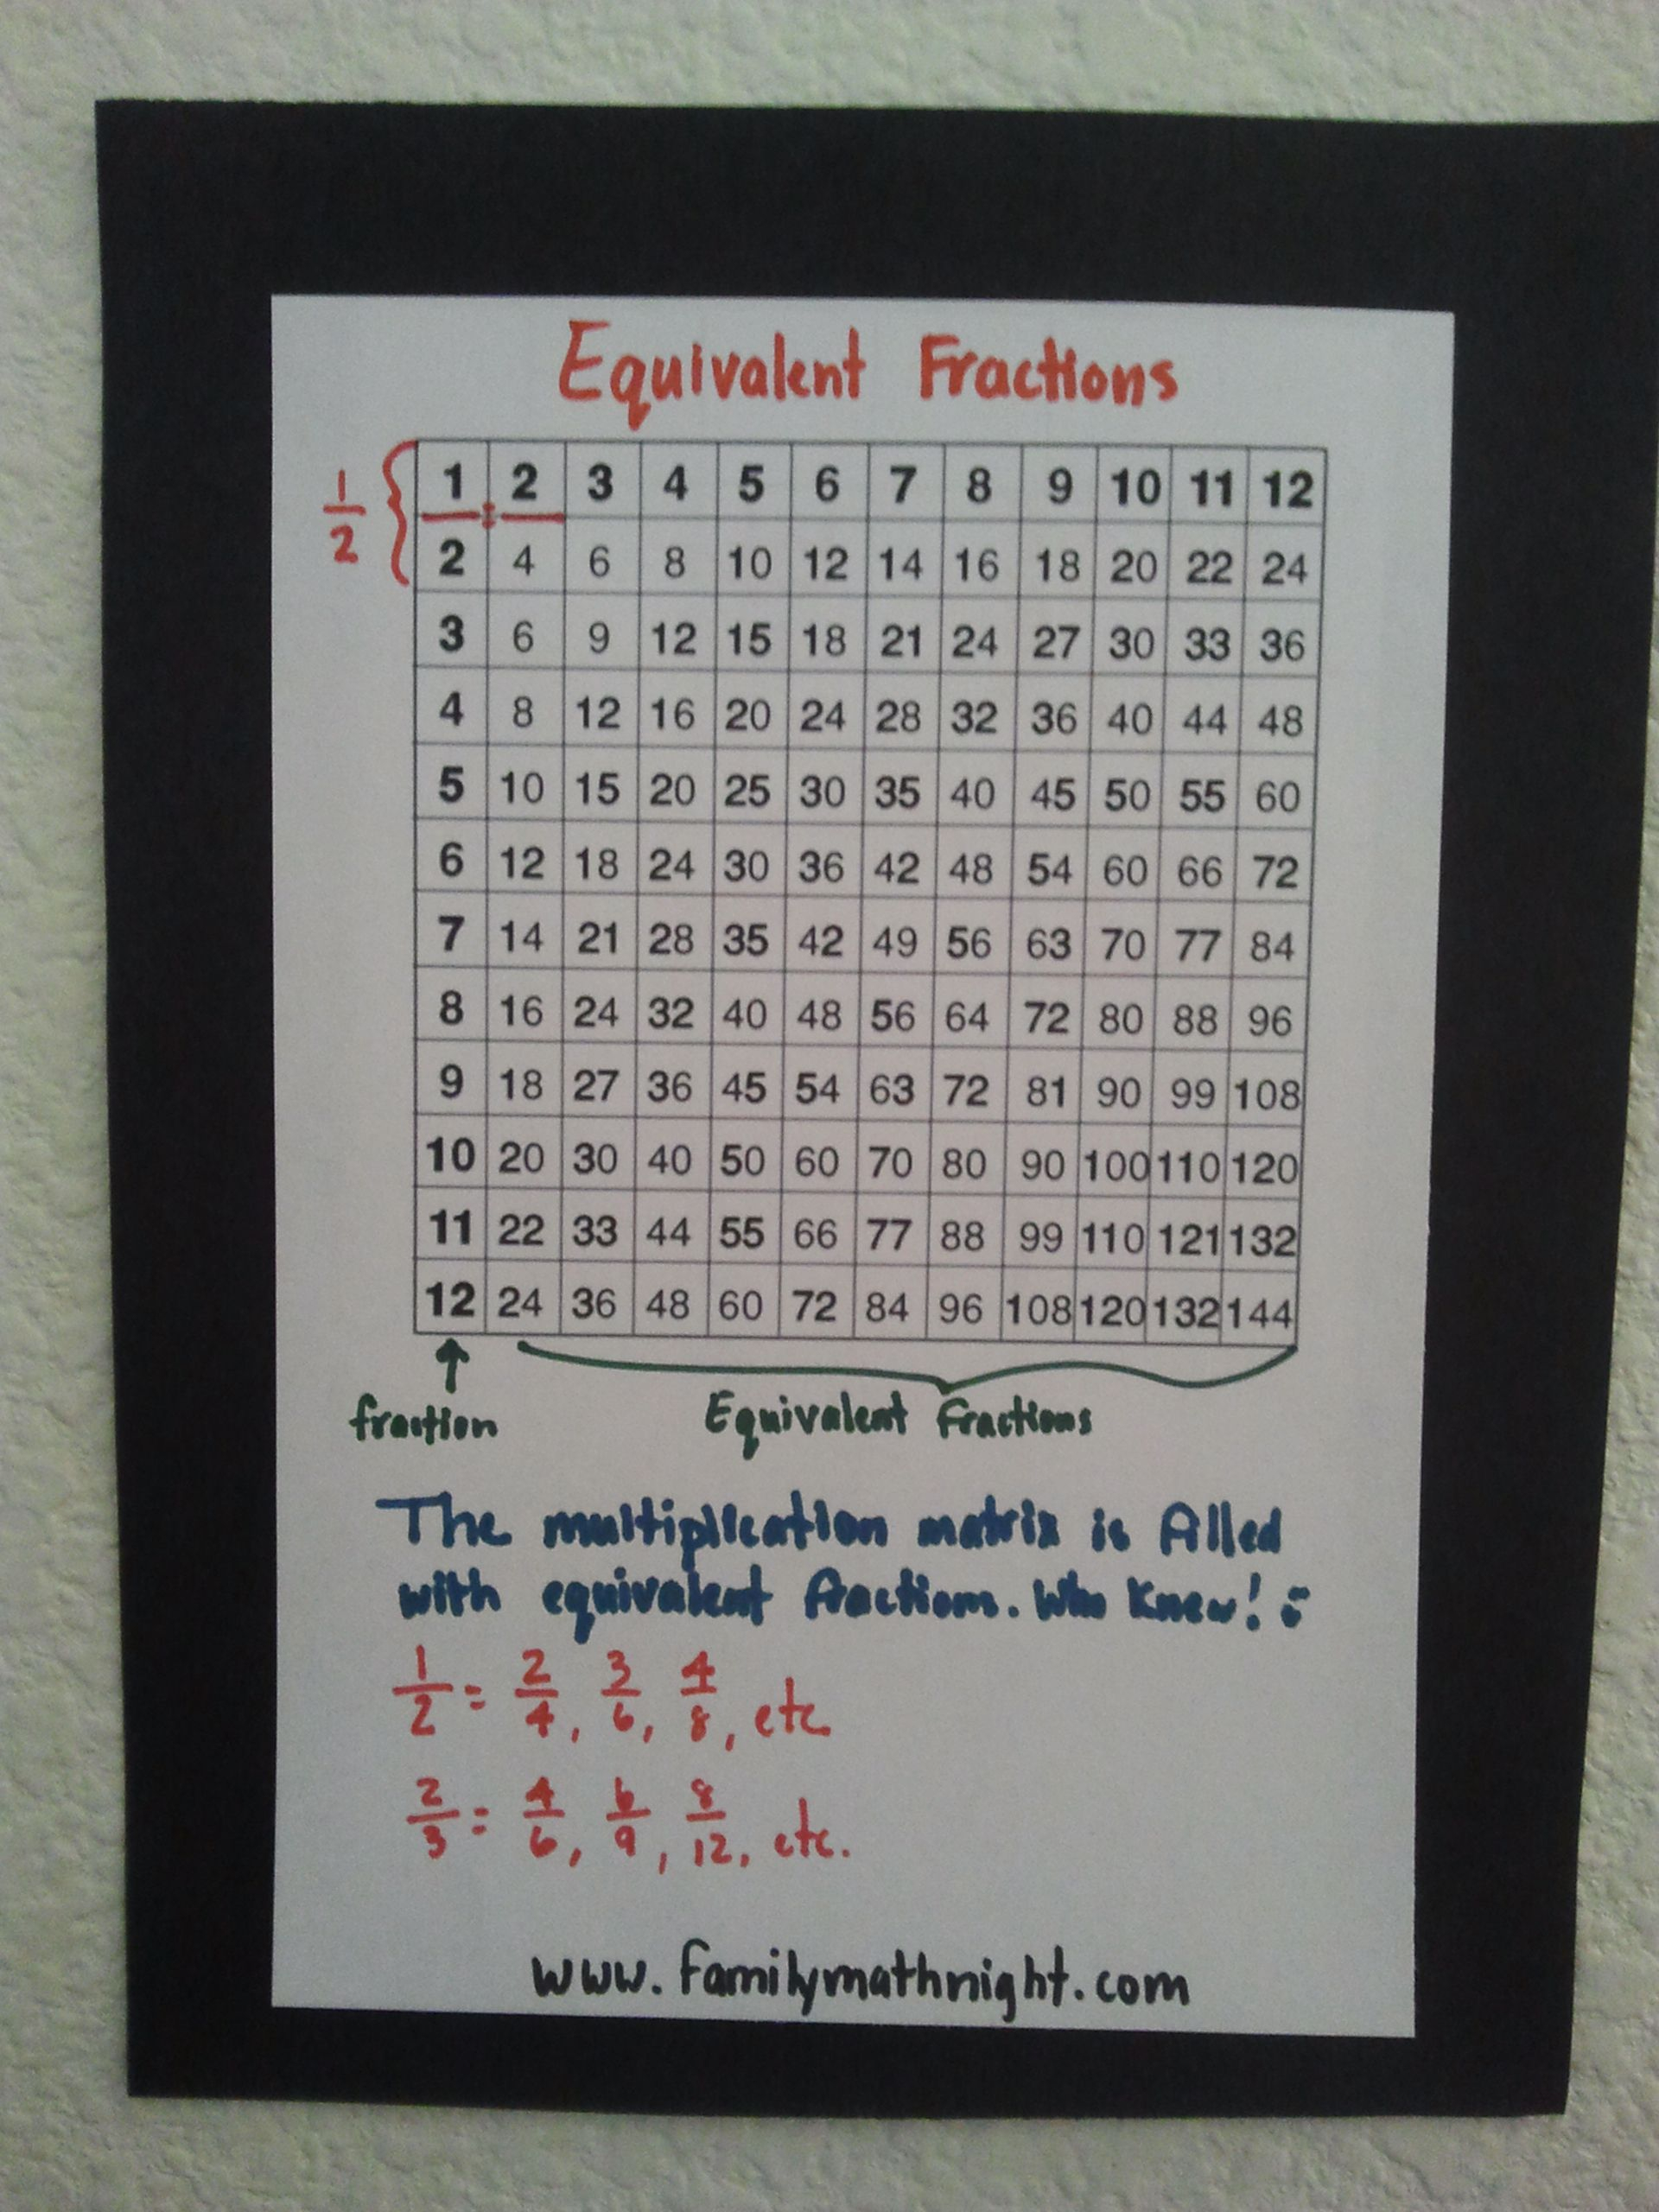 Equivalent Fractions Using A Multiplication Chart. Brilliant